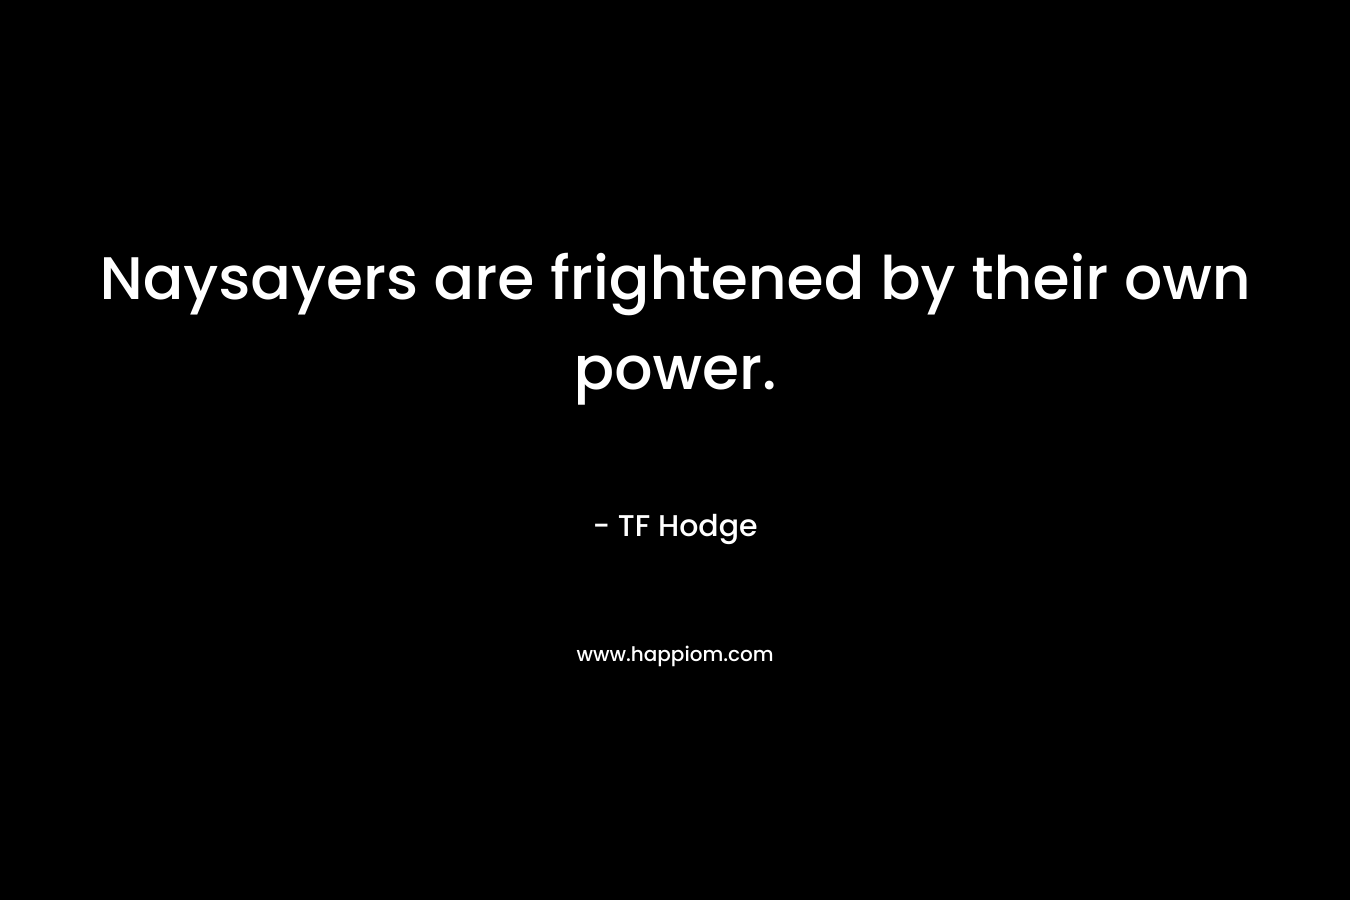 Naysayers are frightened by their own power. – TF Hodge